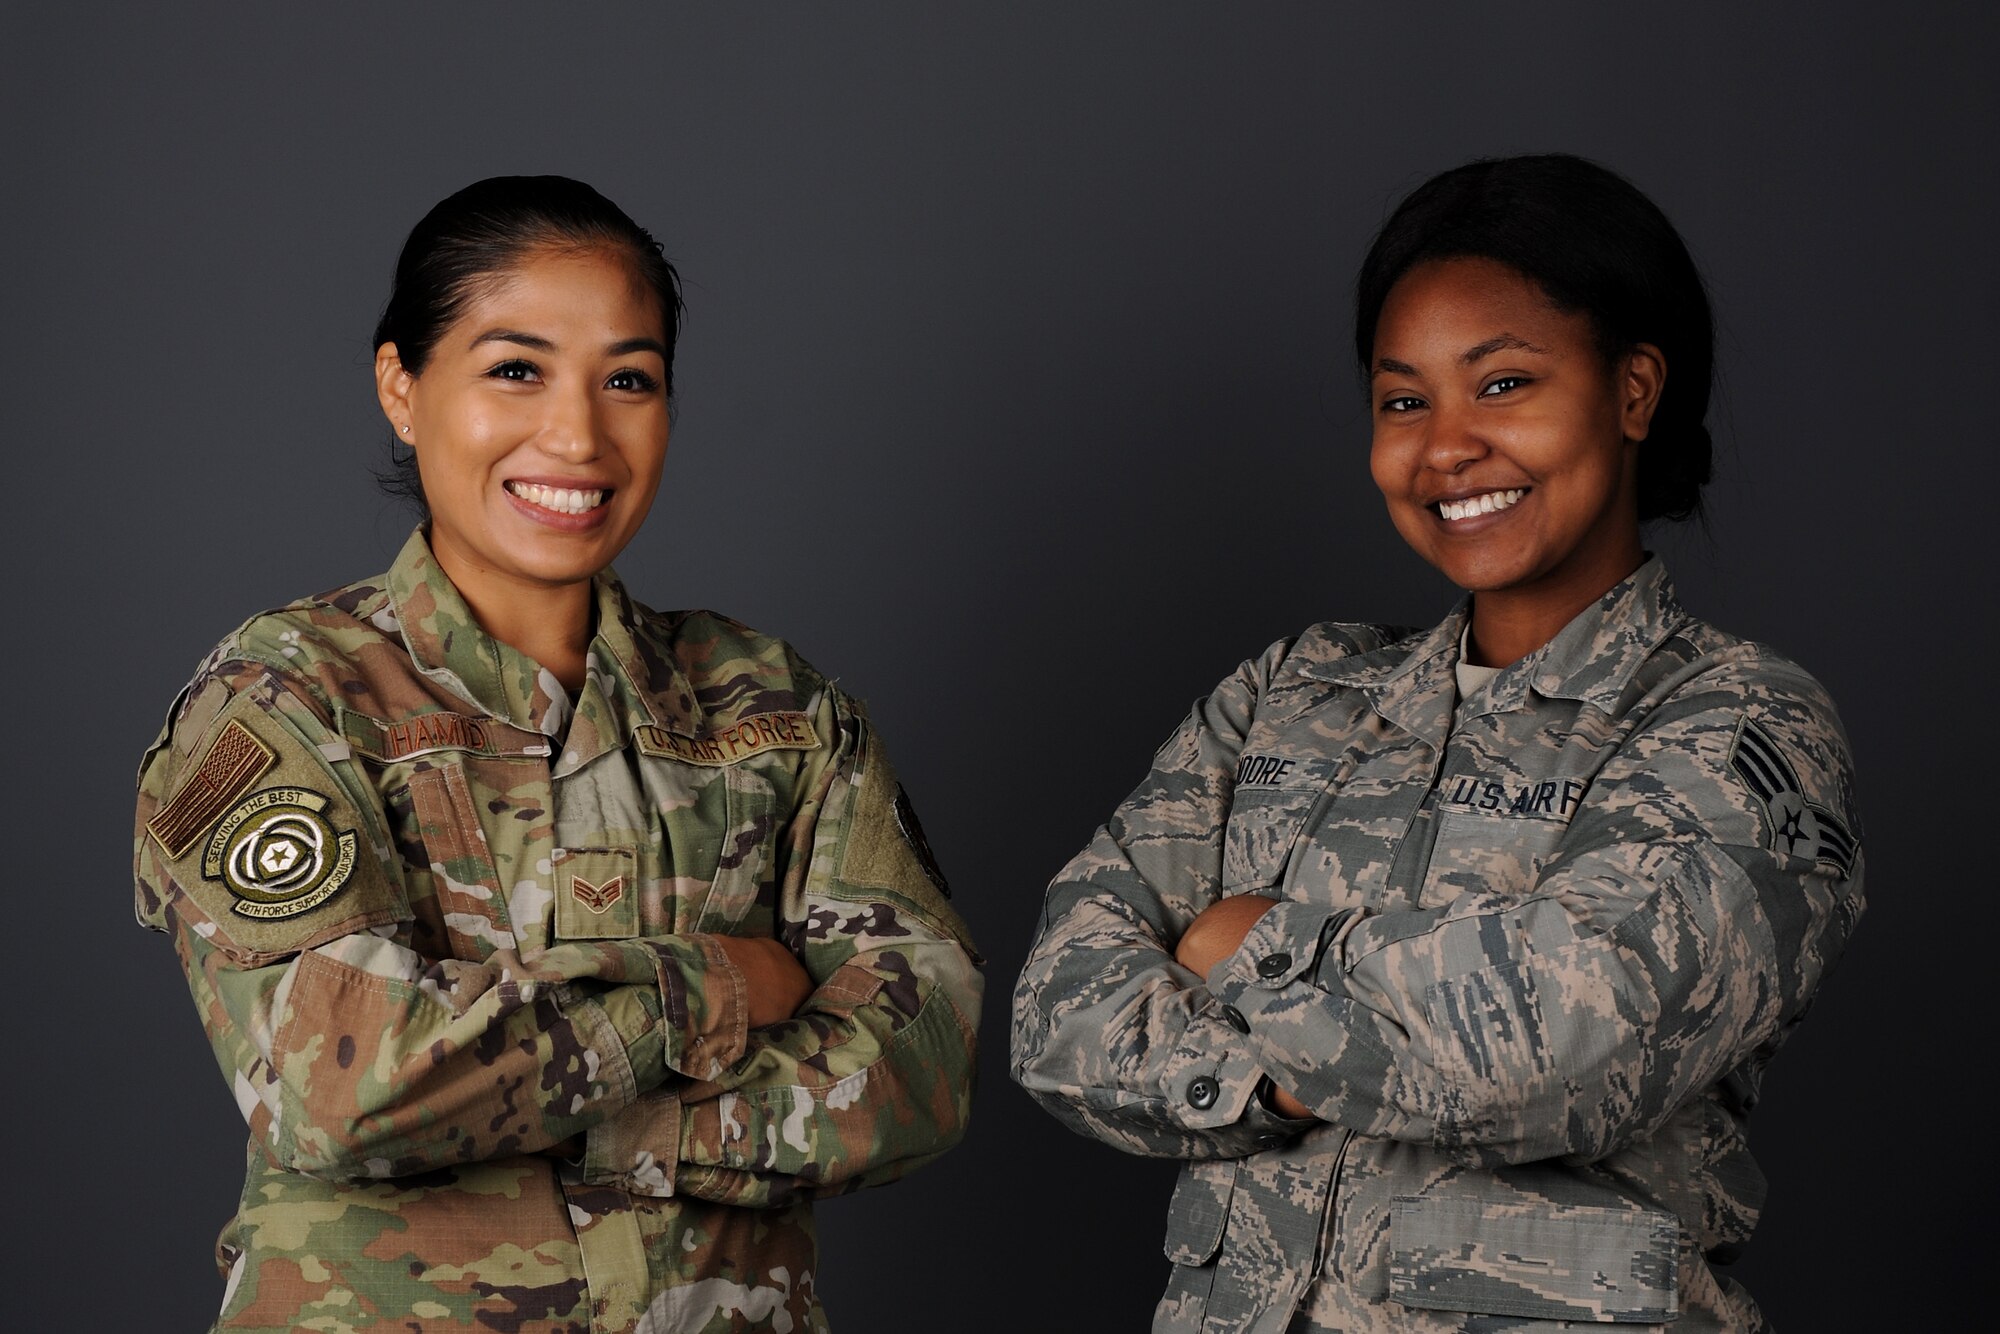 Senior Airman Gladiola Hamid, 48th Force Support Squadron unit deployment manager, left, and Senior Airman Gabrielle Moore, 48th FSS military postal clerk, right, pose for photo at Royal Air Force Lakenheath, England, Nov. 18, 2018. Hamid and Moore provided rescue aid to Spanish civilians involved in a three-car collision near the town of Mogán en-route to Gando Air Base in Gran Canaria, Spain. (U.S. Air Force photo by Airman 1st Class Rhonda Smith)